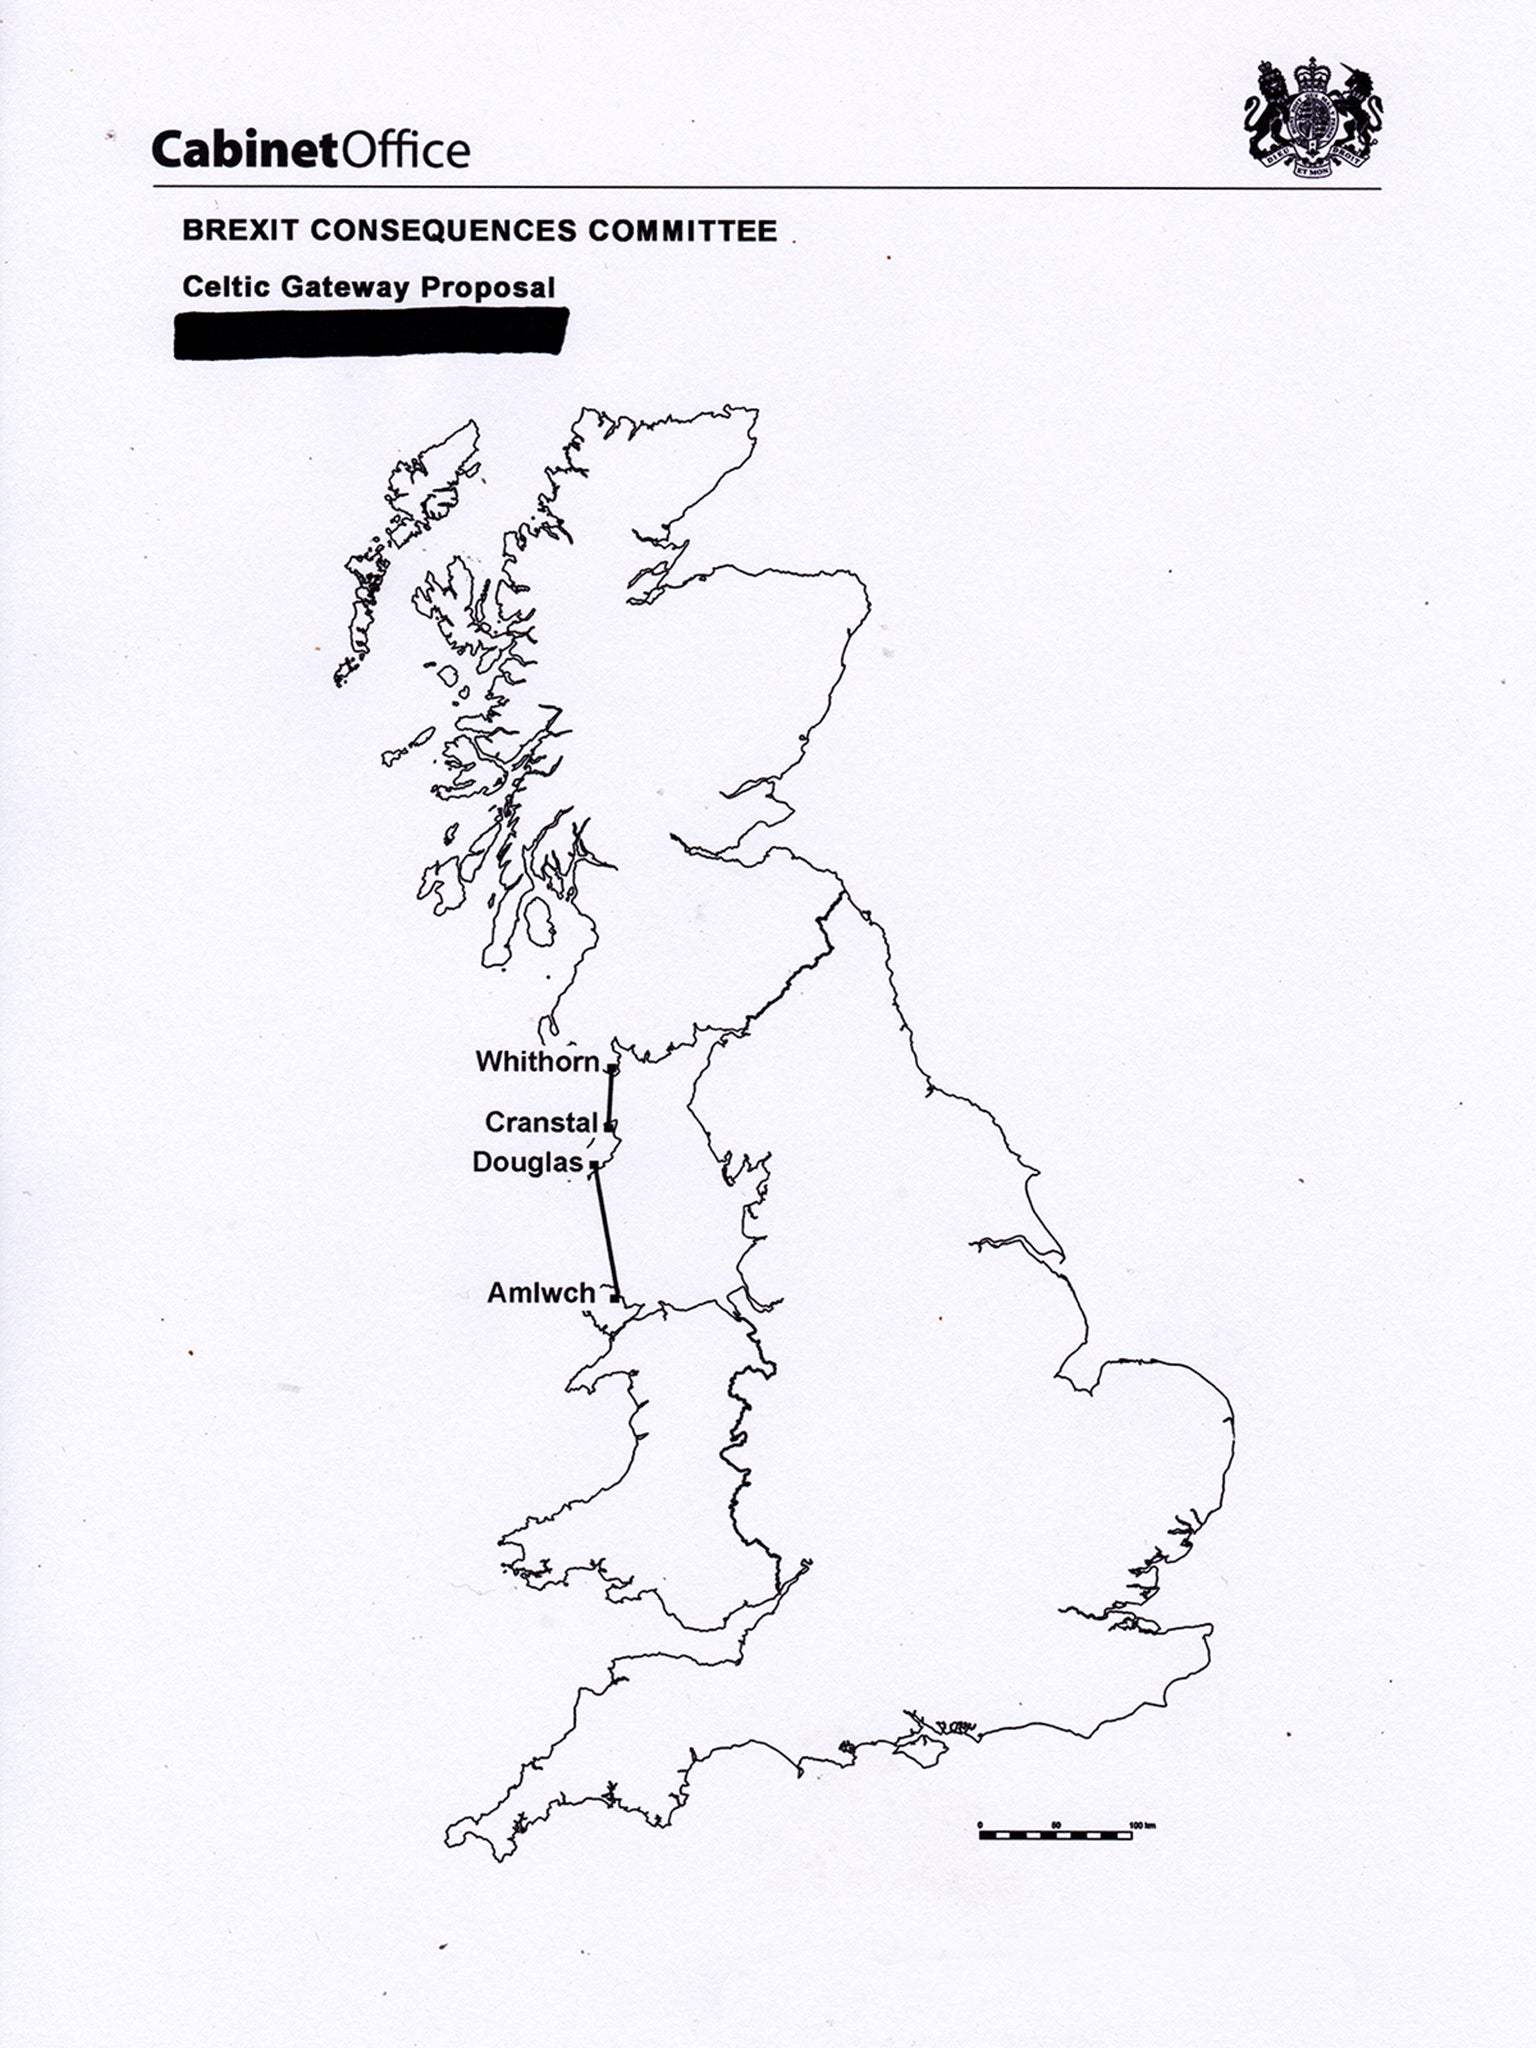 Civil servants also saw a map with a proposed route for a tunnel or bridge connecting Wales and Scotland